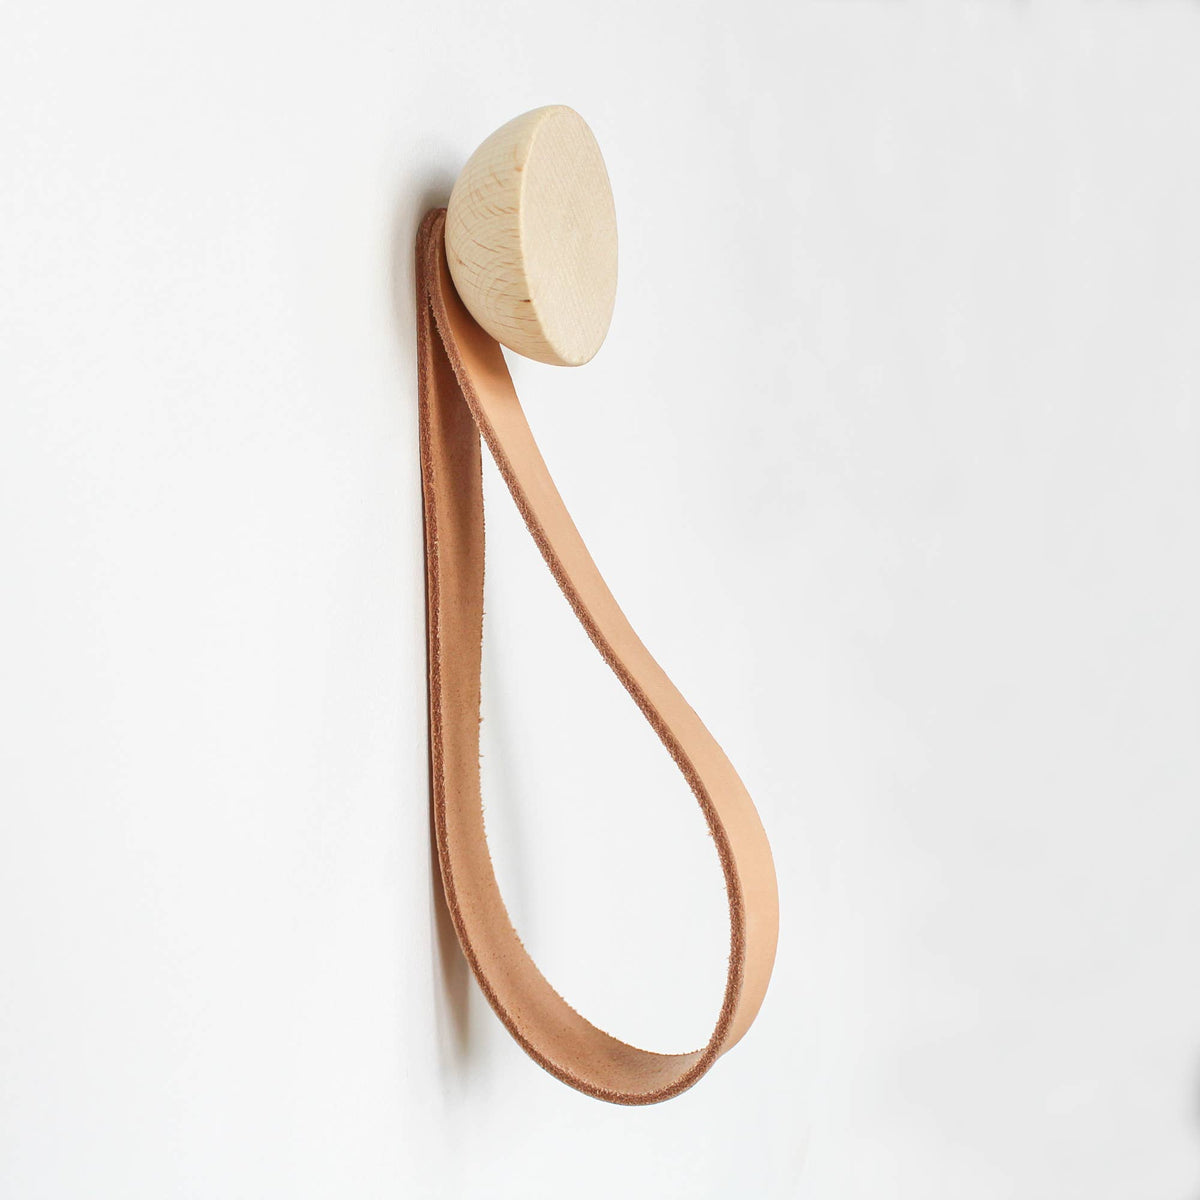 Beech Wood Wall Mounted Coat Hook With Leather Strap - Holistic Habitat 